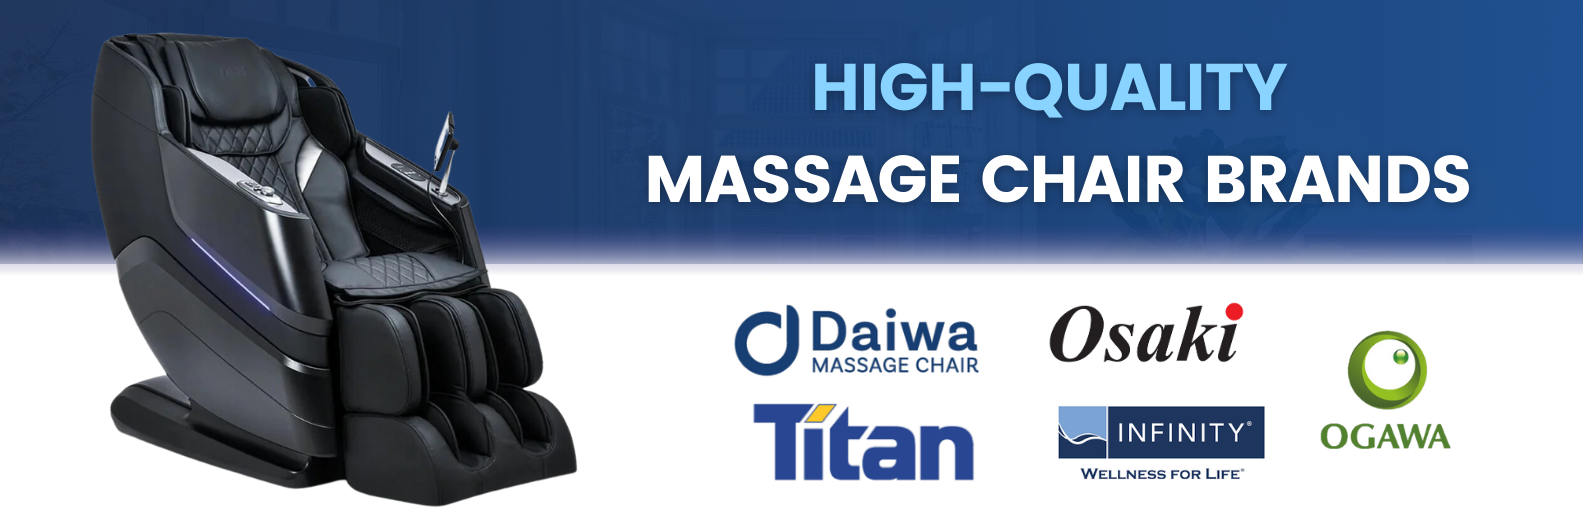 Find the best massage chairs for your home to achieve complete relaxation. For a luxurious at-home spa experience, read about the best massage chair brands in English.